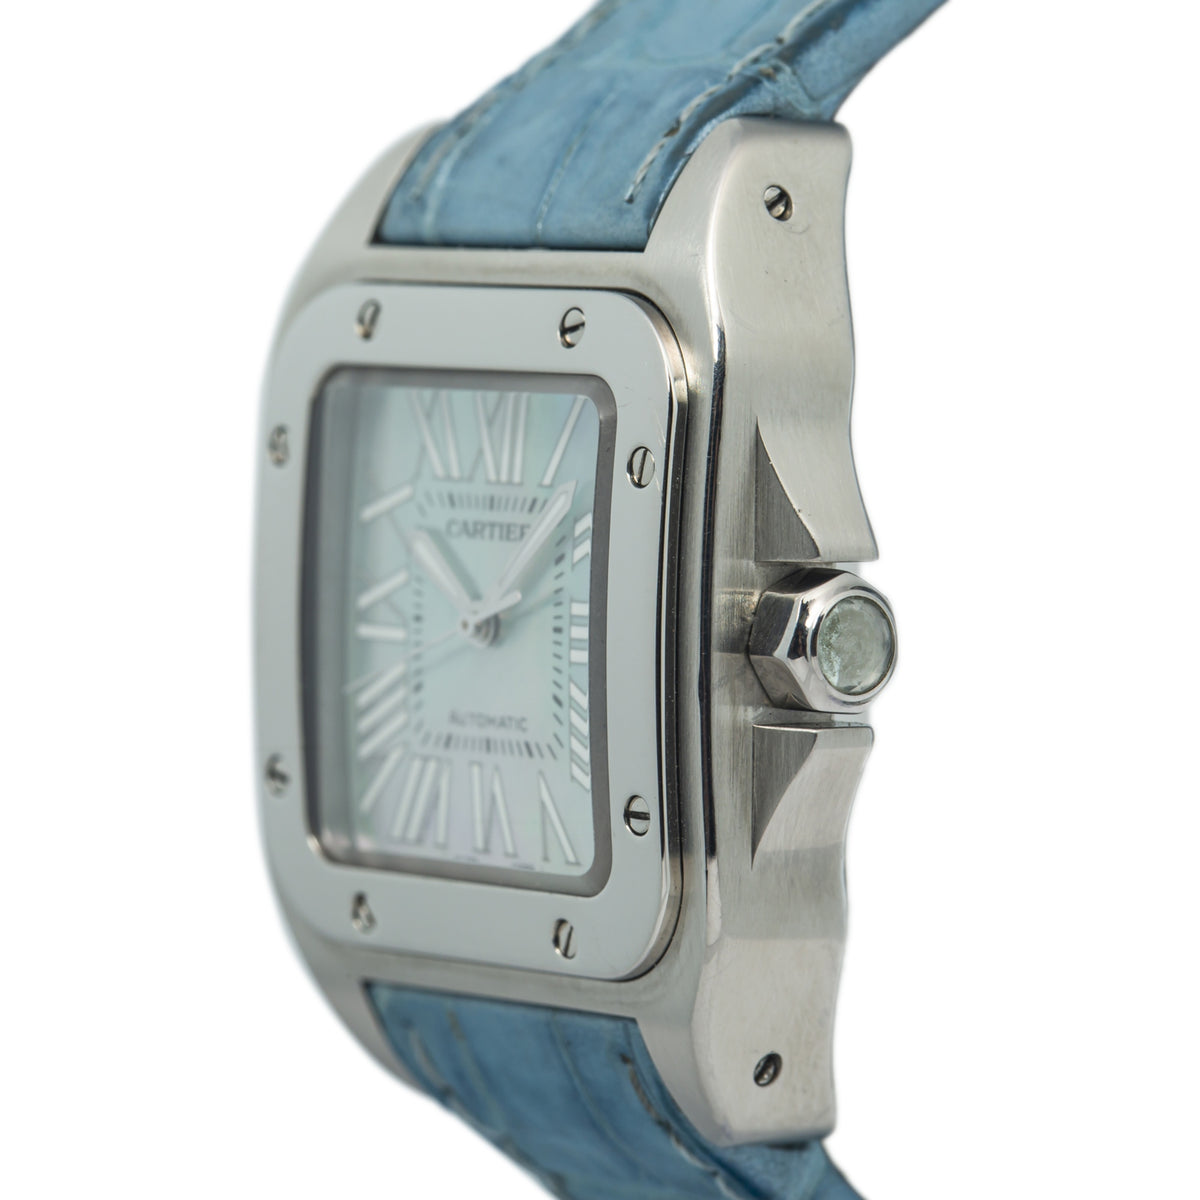 Cartier Santos 100 2878 W20132X8 Blue Mother of Pearl RARE Automatic Watch 33mm